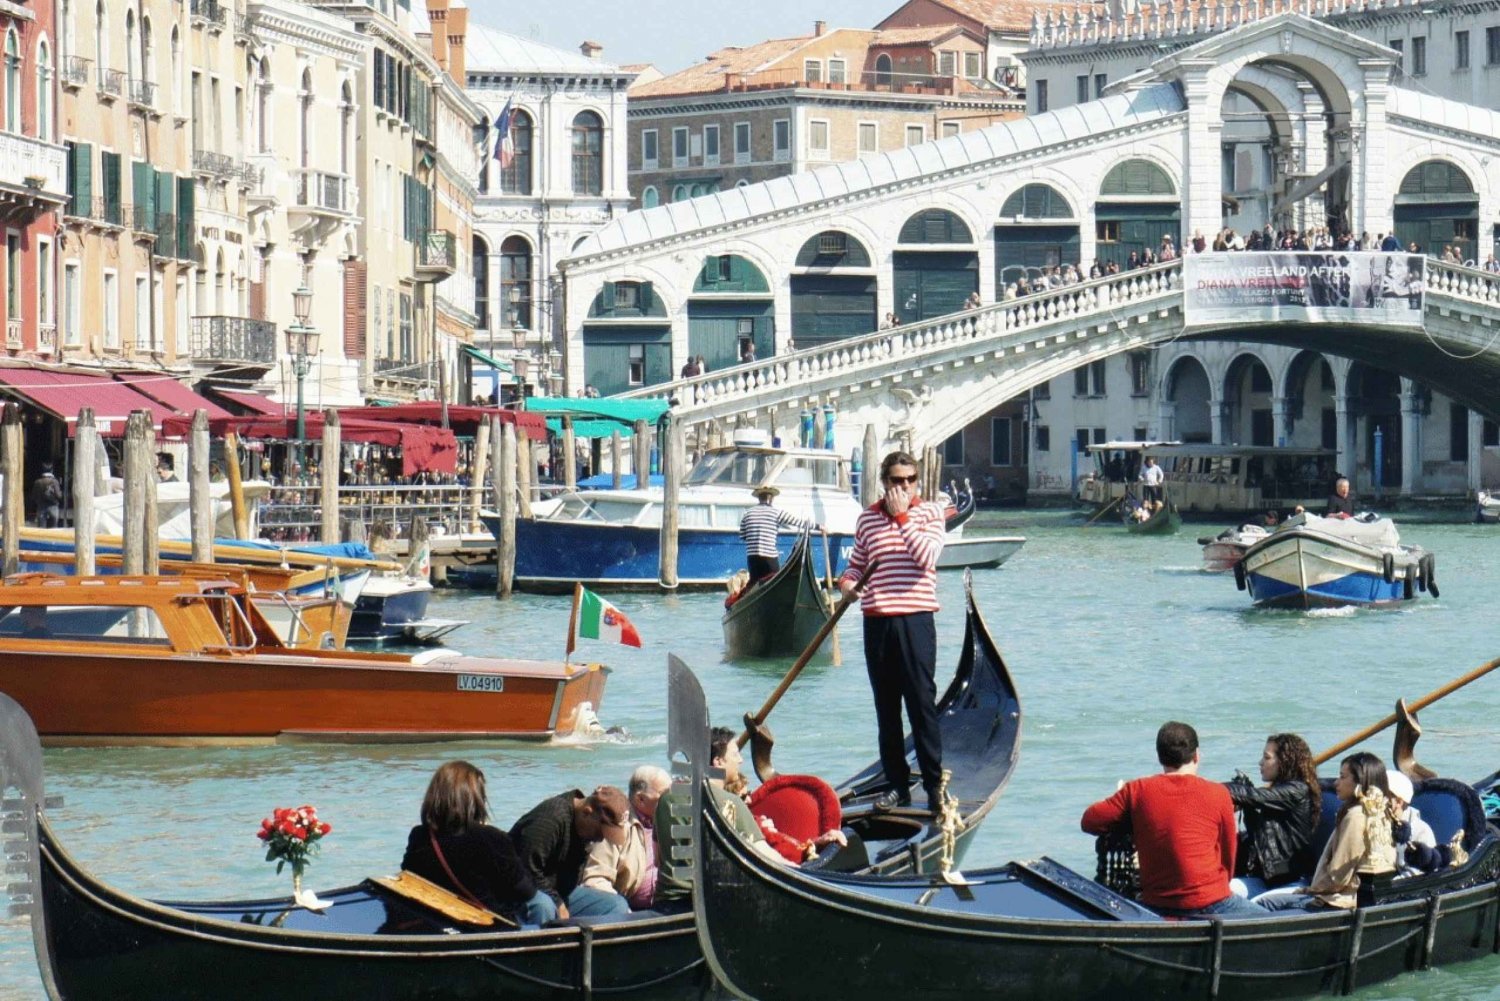 Full day in Venice by train from Milan (Self-guided tour)